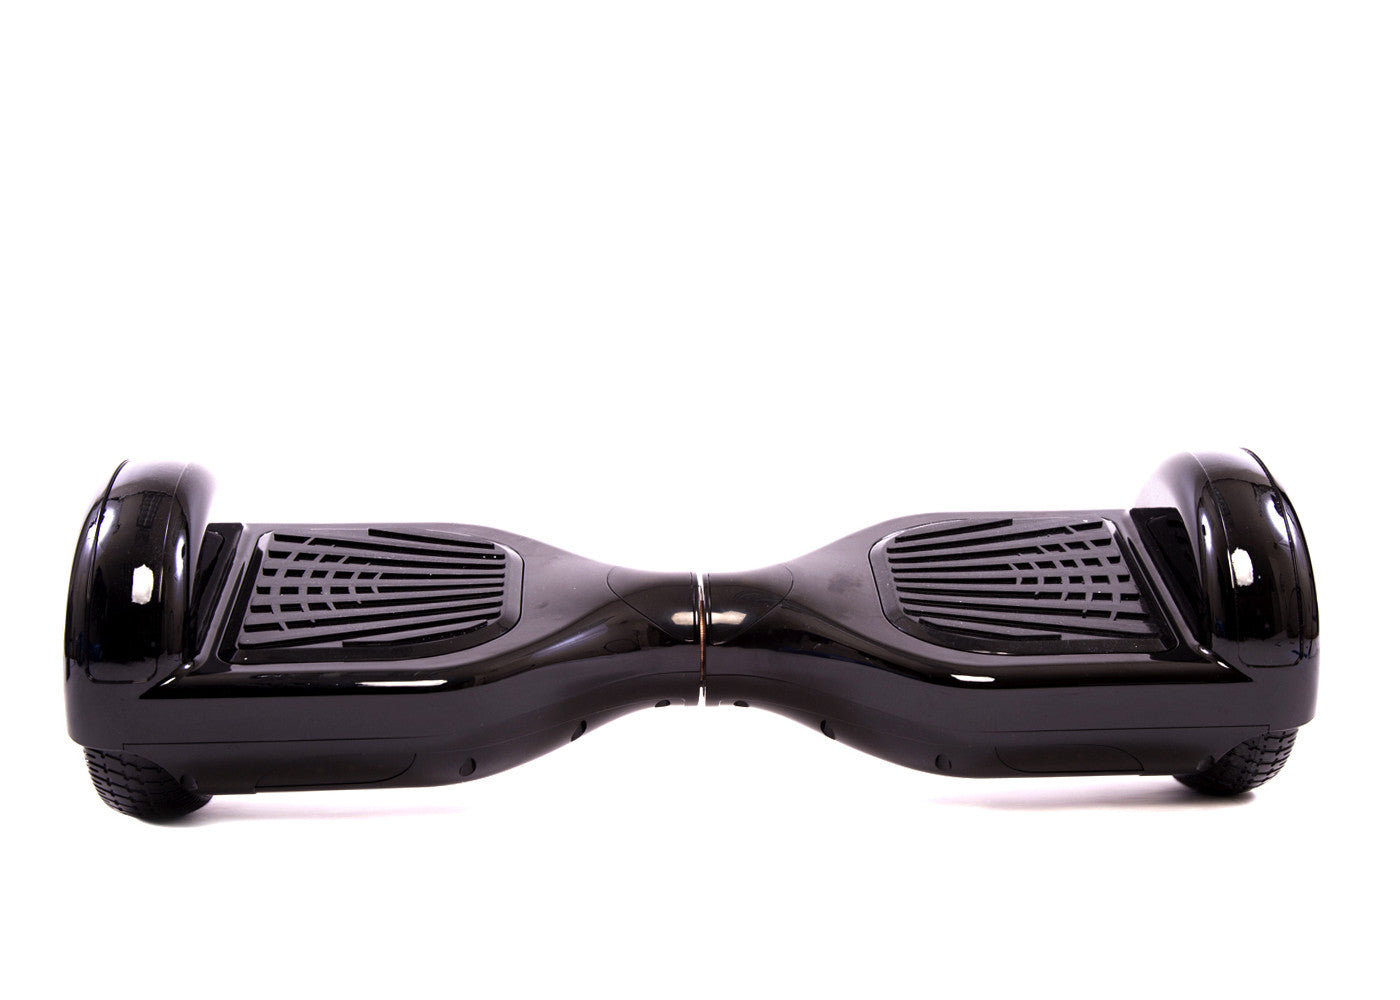 imoto hoverboard rating